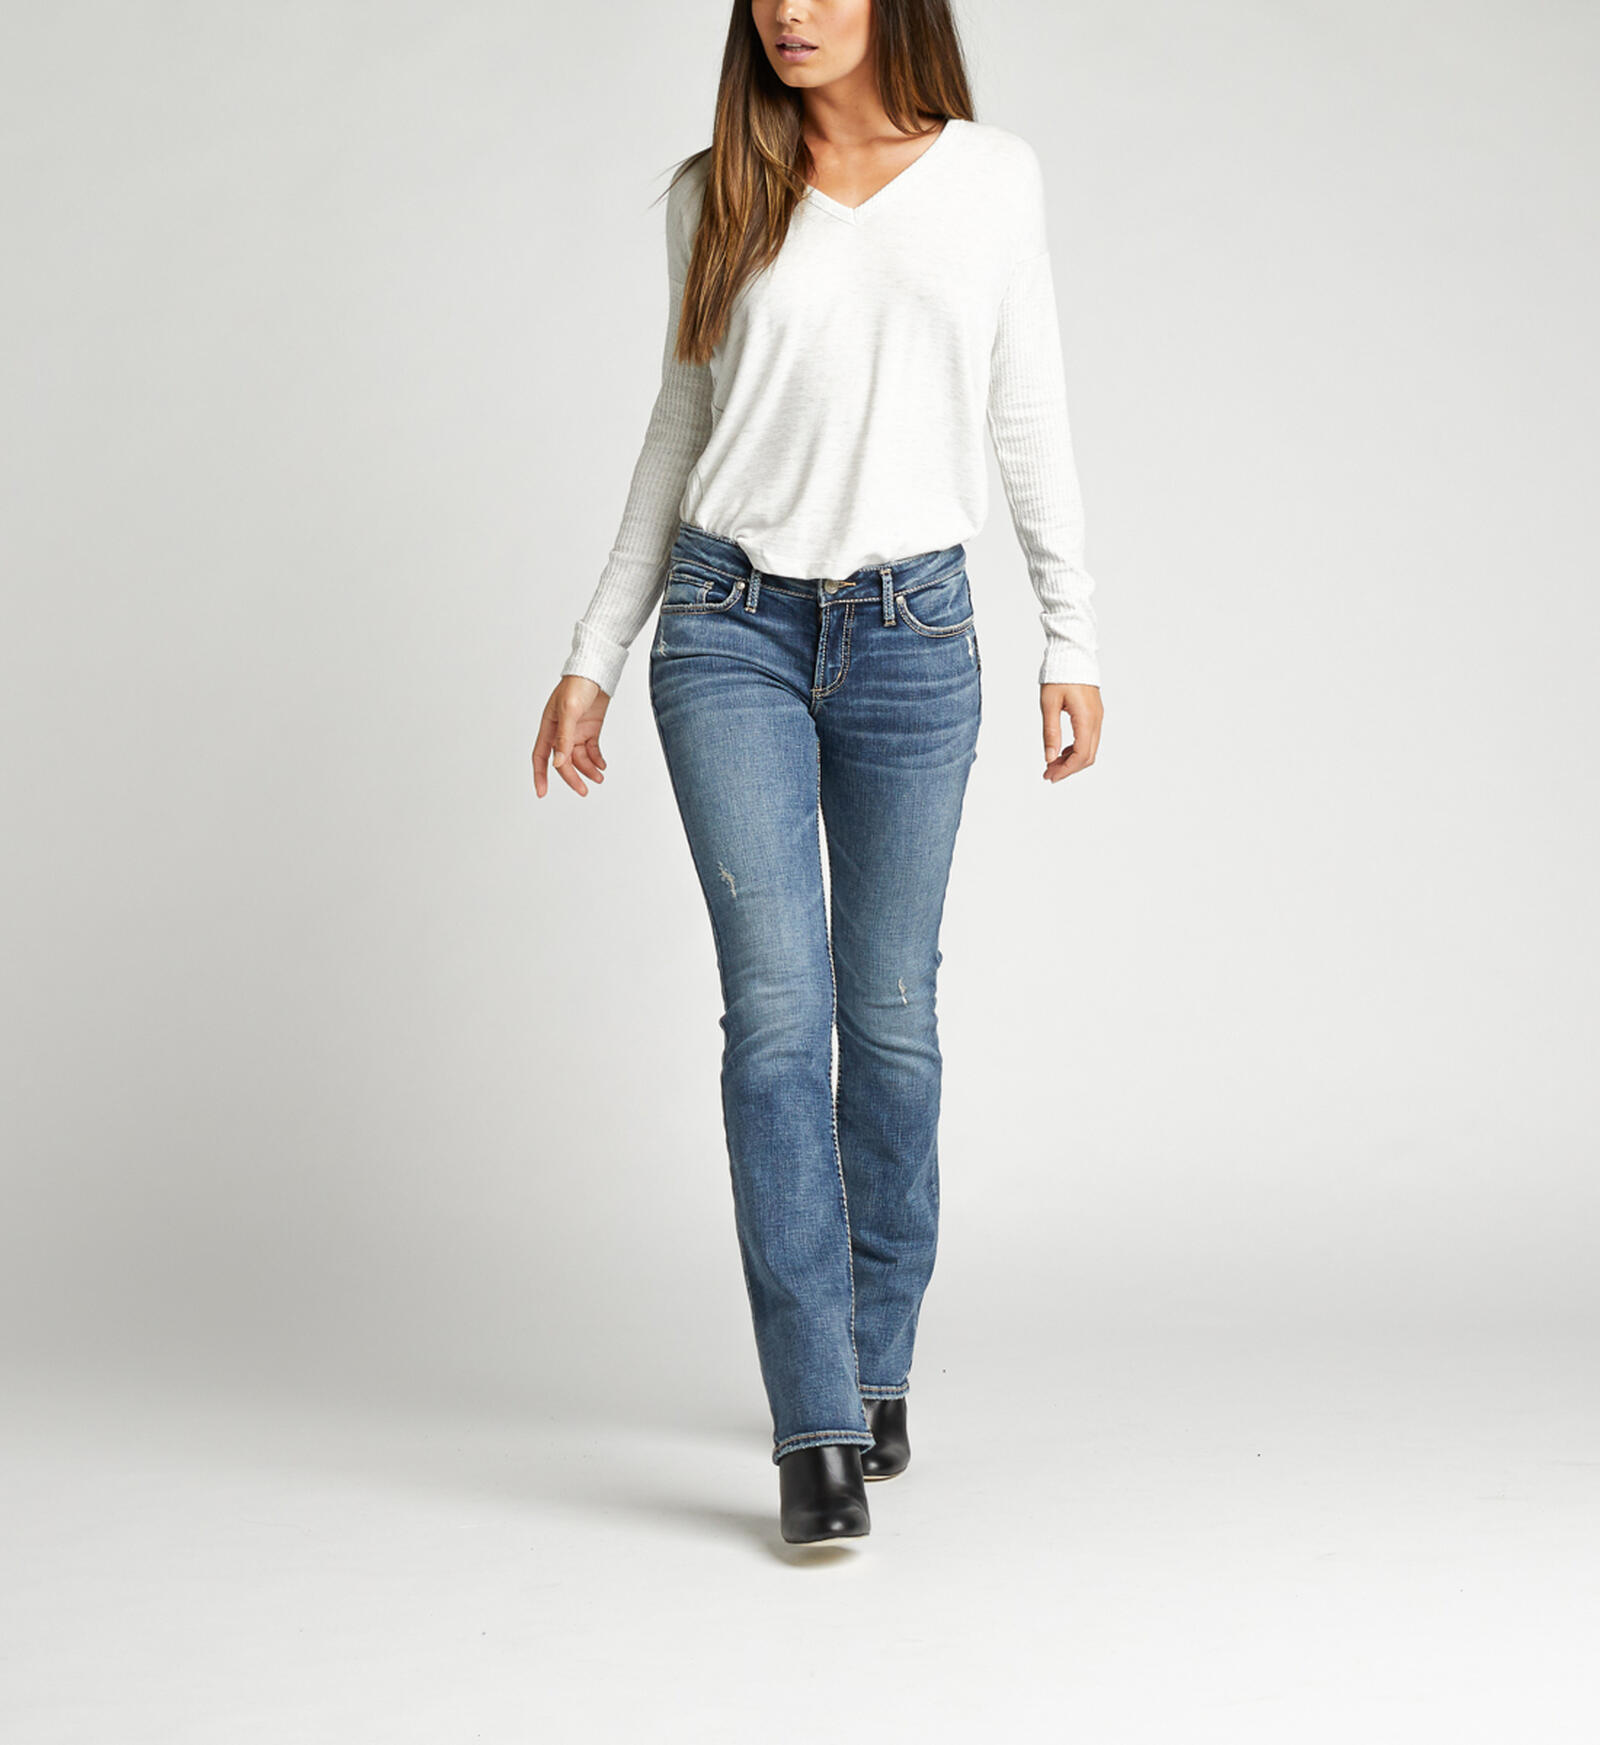 Buy Elyse Mid Rise Slim Bootcut Jeans for CAD 108.00